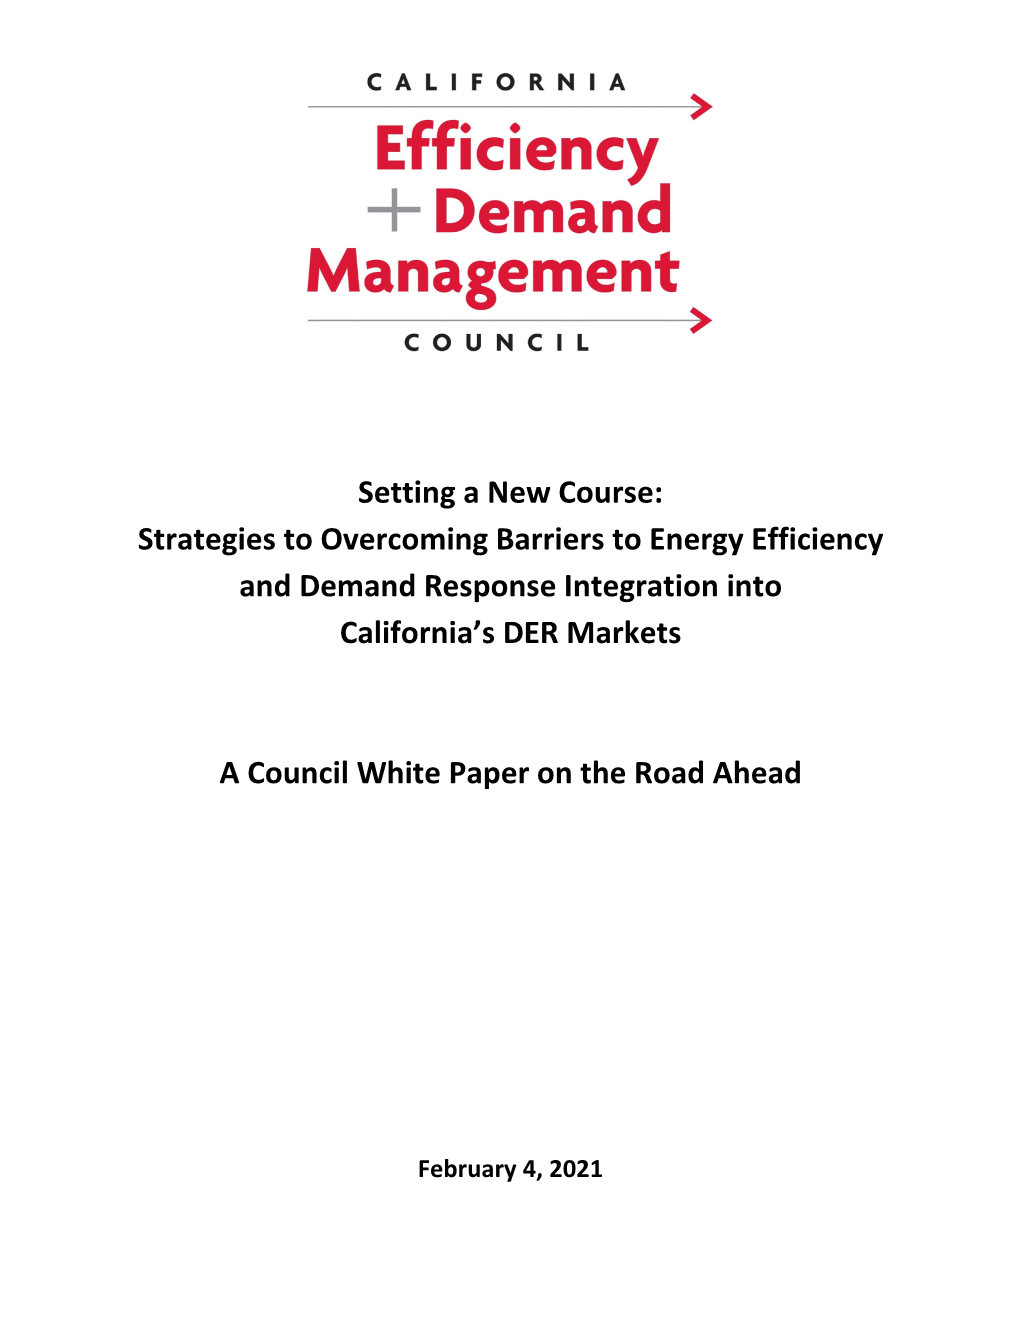 Setting a New Course: Strategies to Overcoming Barriers to Energy Efficiency and Demand Response Integration Into California’S DER Markets